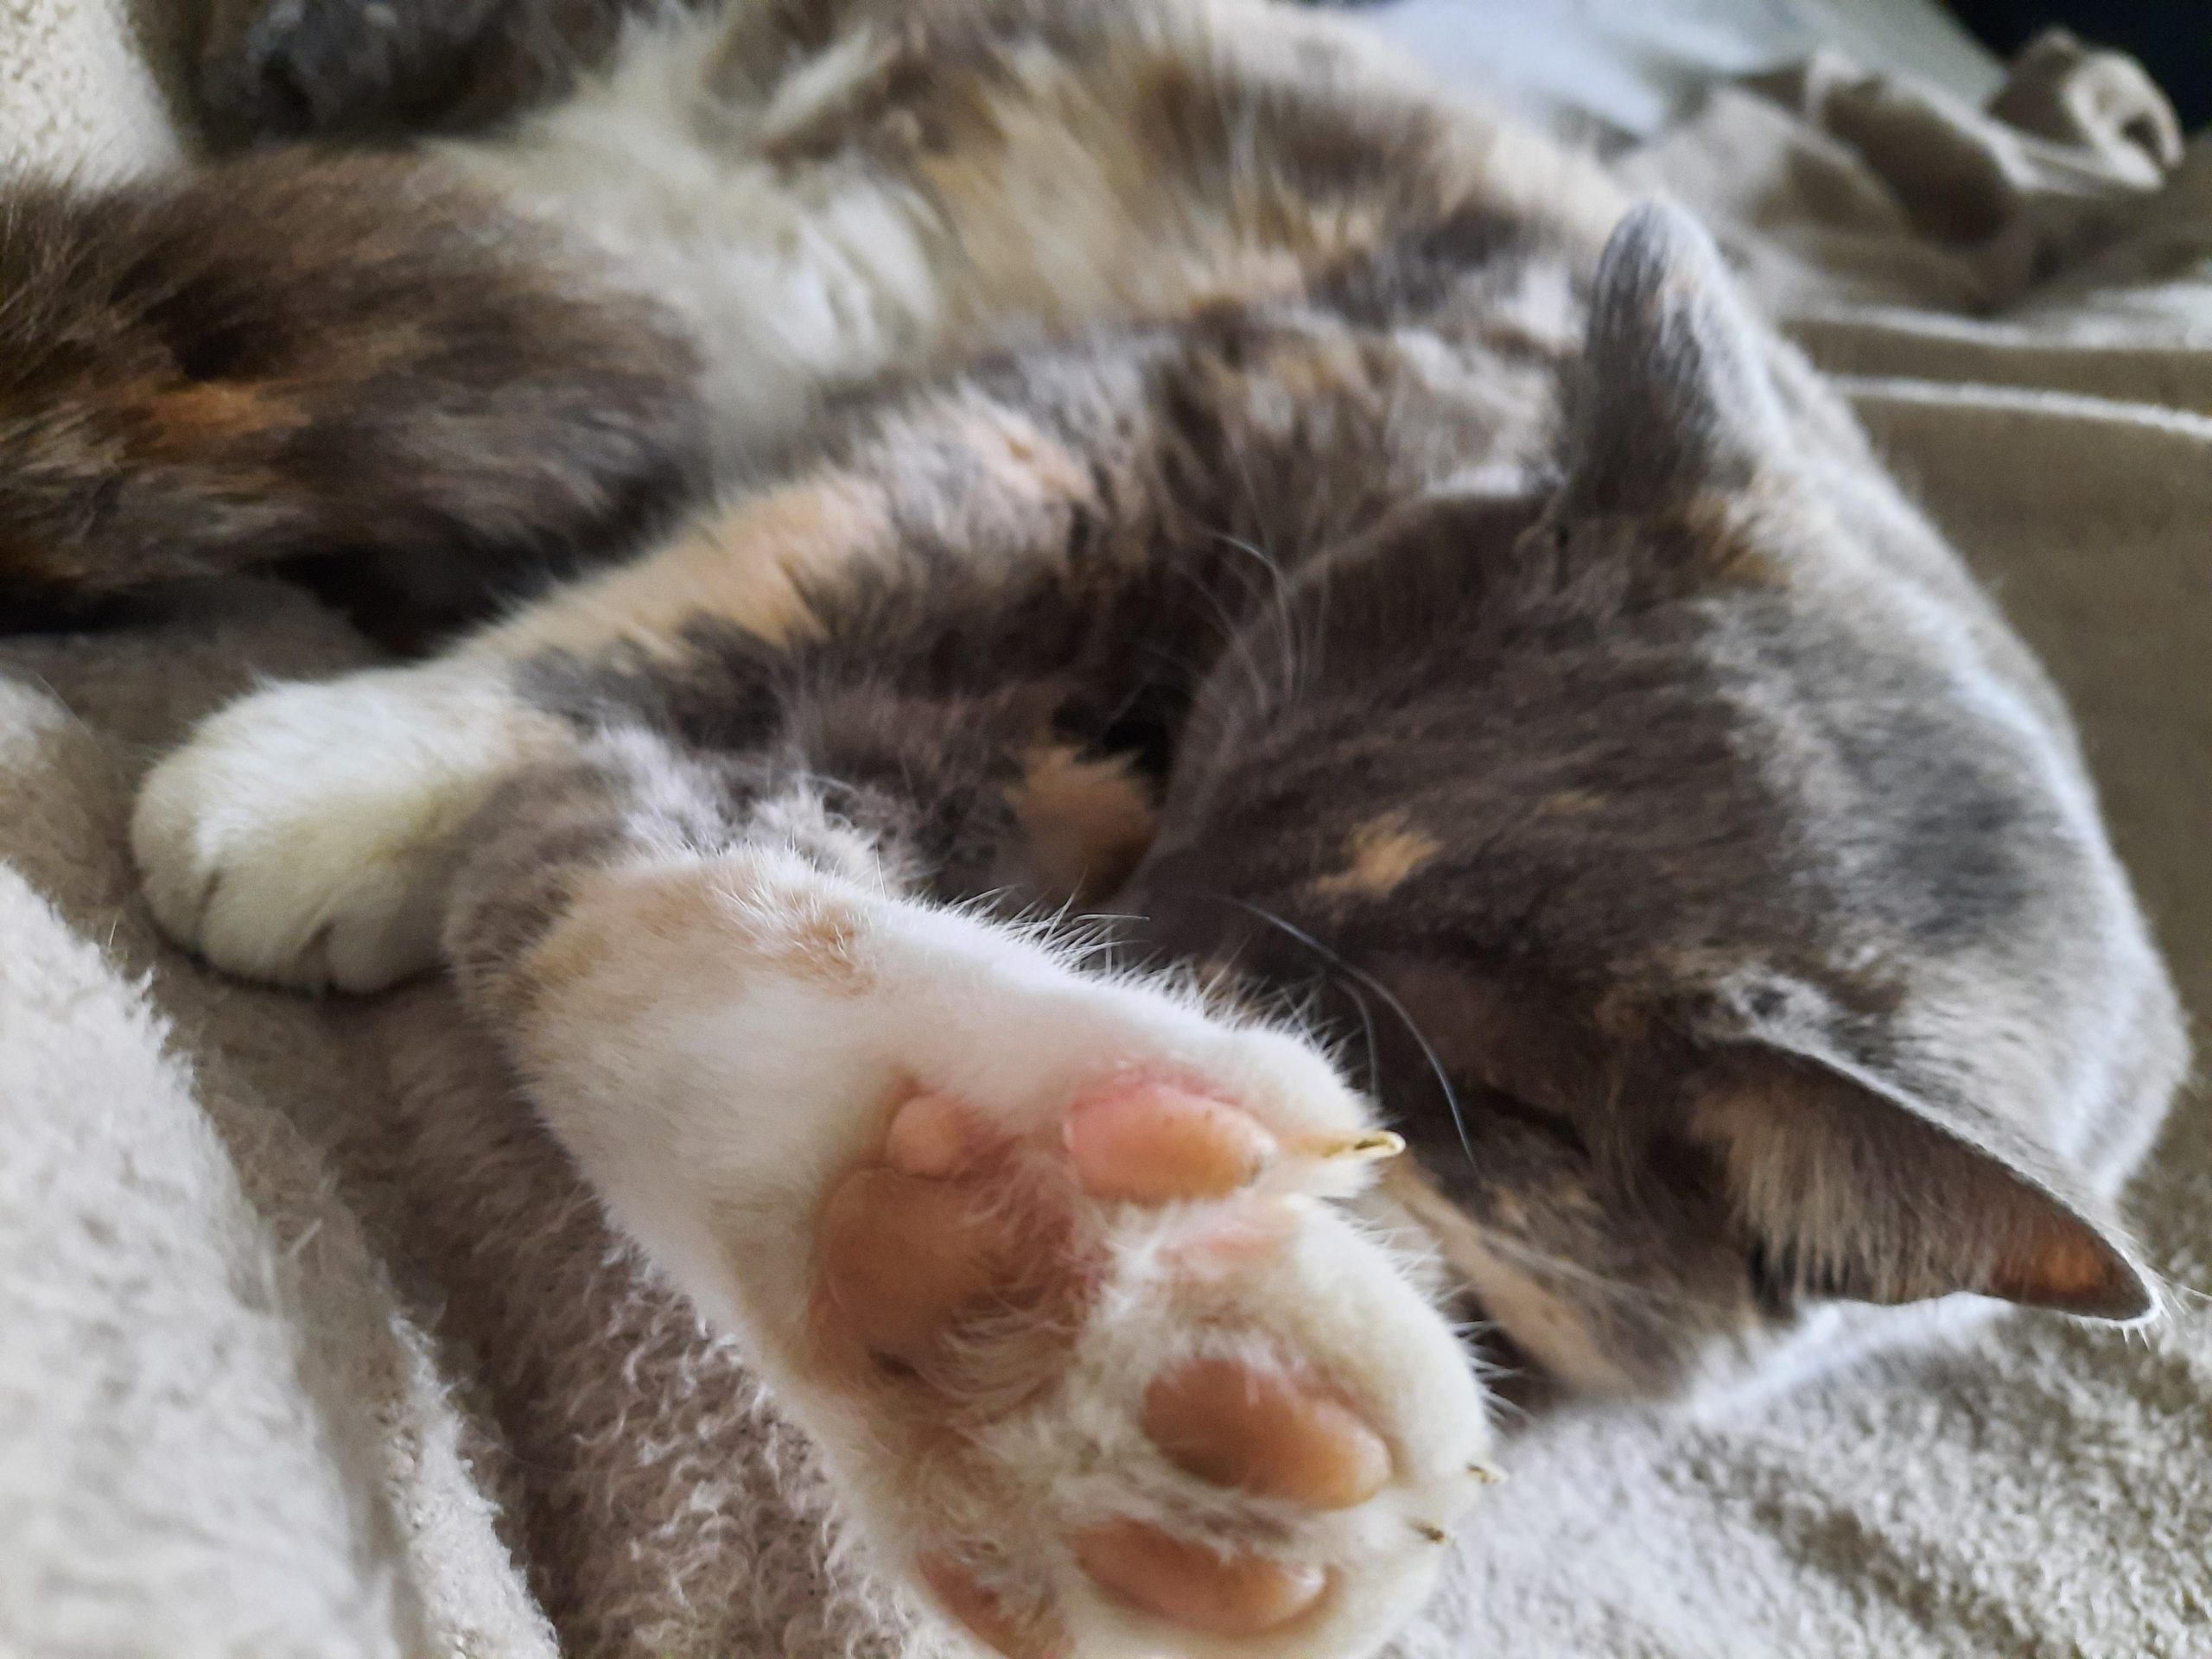 Some Caturday toe beans